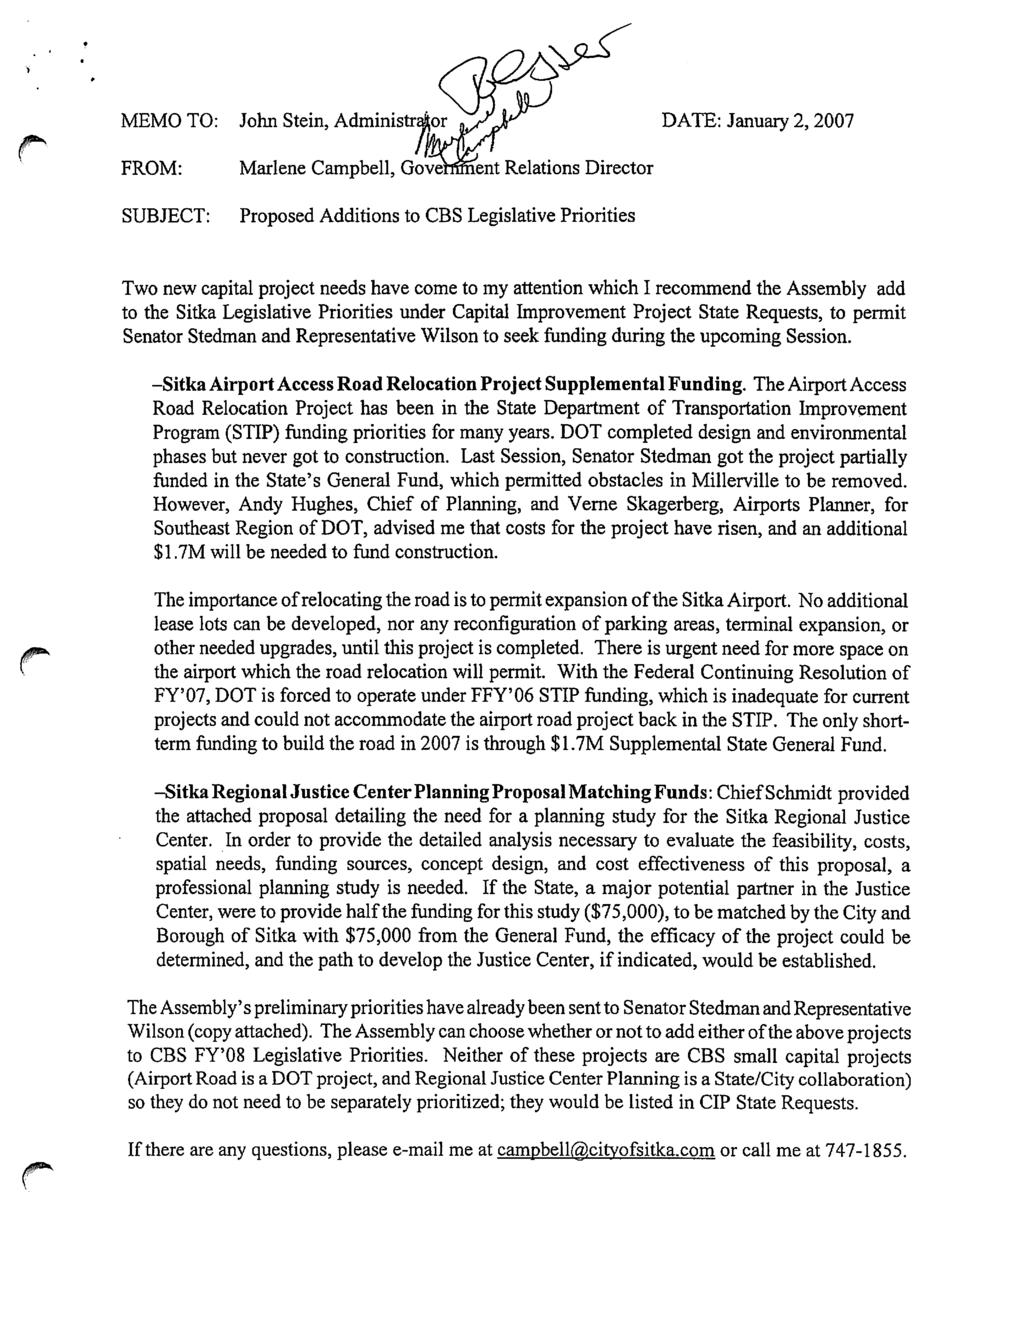 MEMO TO: John Stein, Administrator y^jr DATE: January 2,2007 FROM: Marlene Campbell, Government Relations Director SUBJECT: Proposed Additions to CBS Legislative Priorities Two new capital project